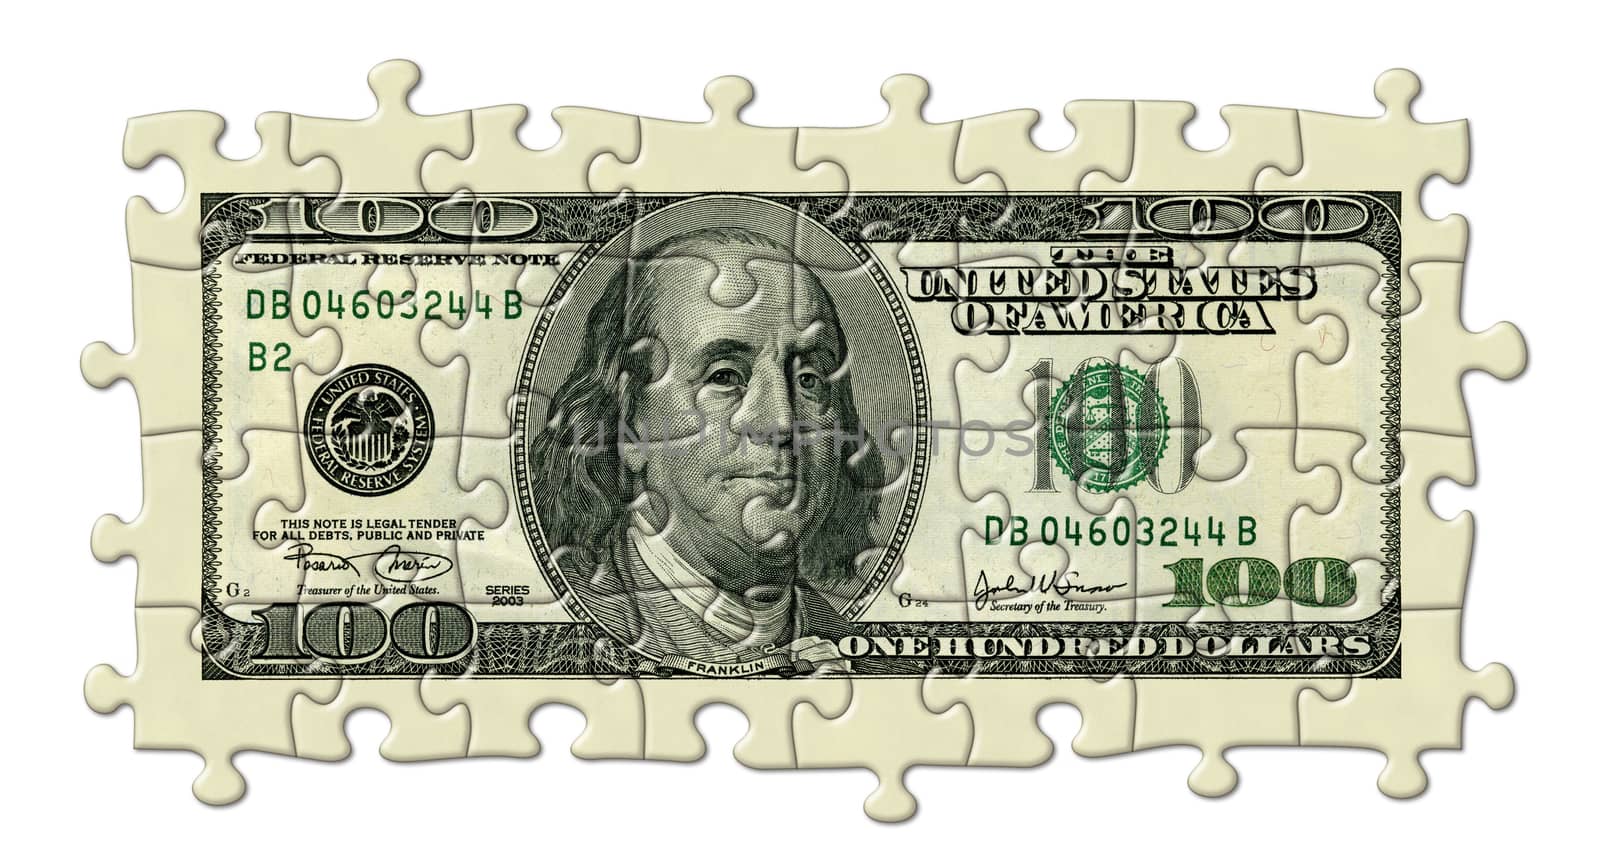 Photo Illustration of a U.S. one hundred dollar bill retouched and re-illustrated as a puzzle.